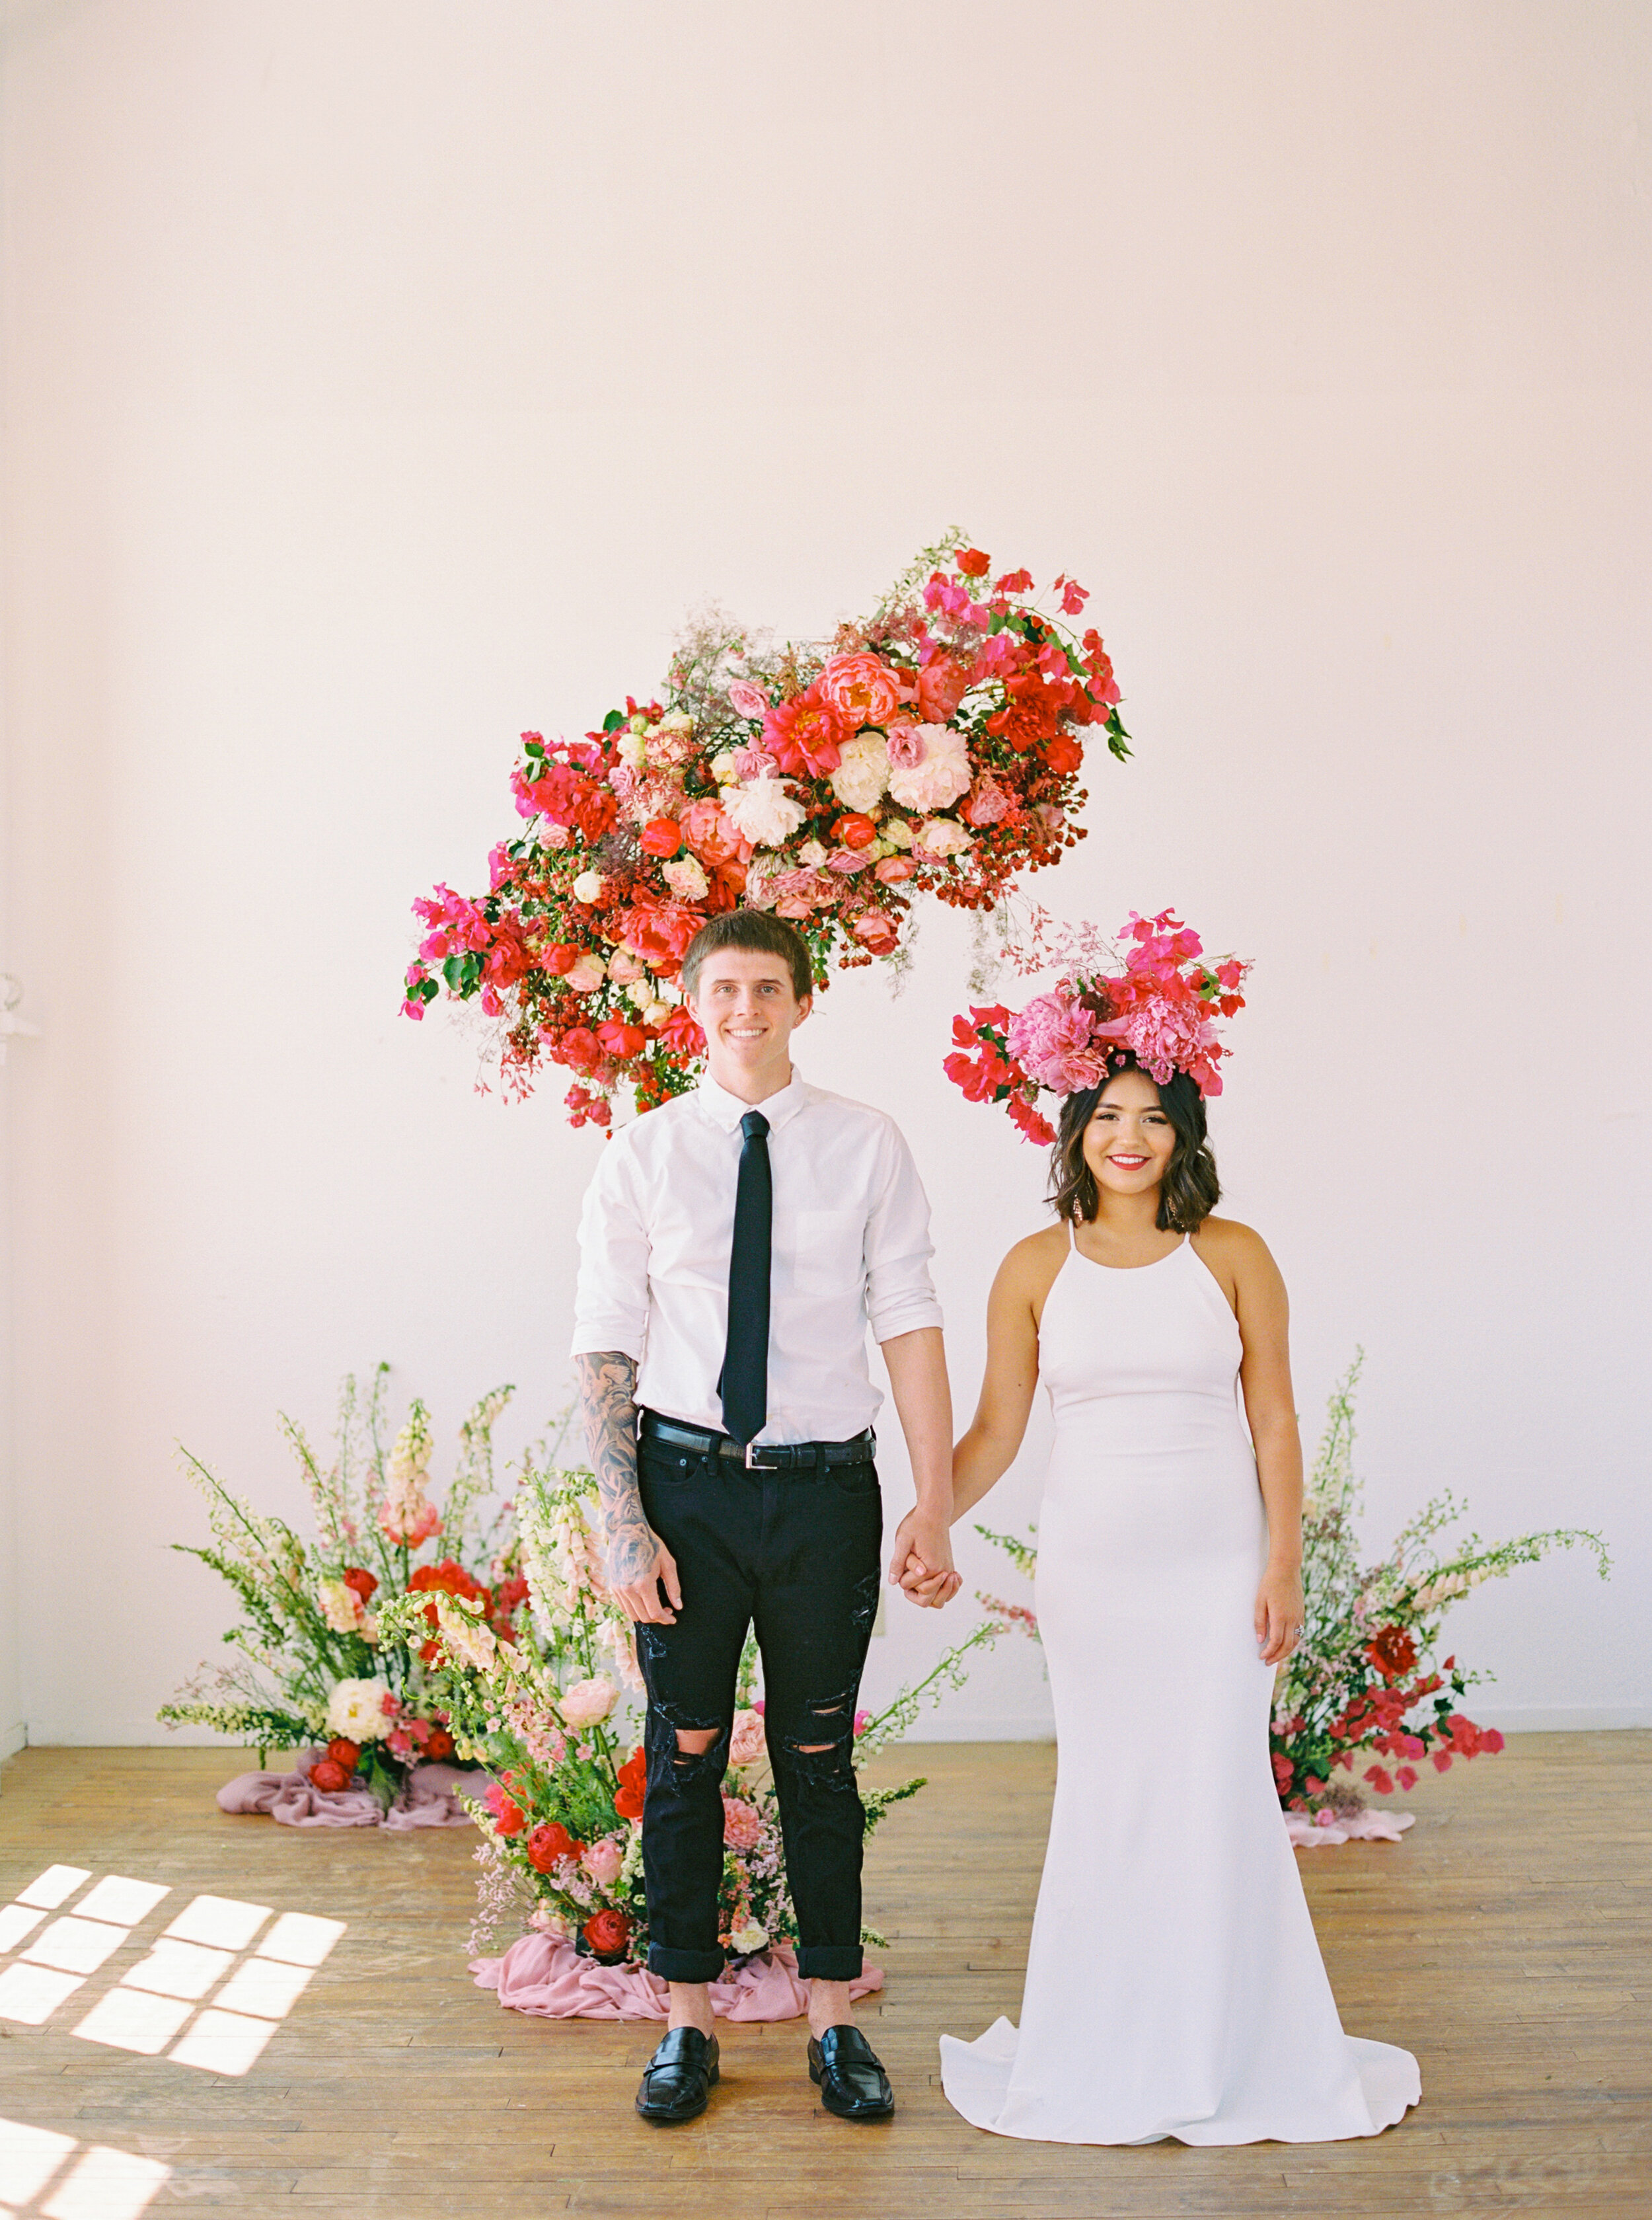 A Romantic Wedding Elopement Filled with Colorful Fuchsia - Sarahi Hadden Submission-40.jpg